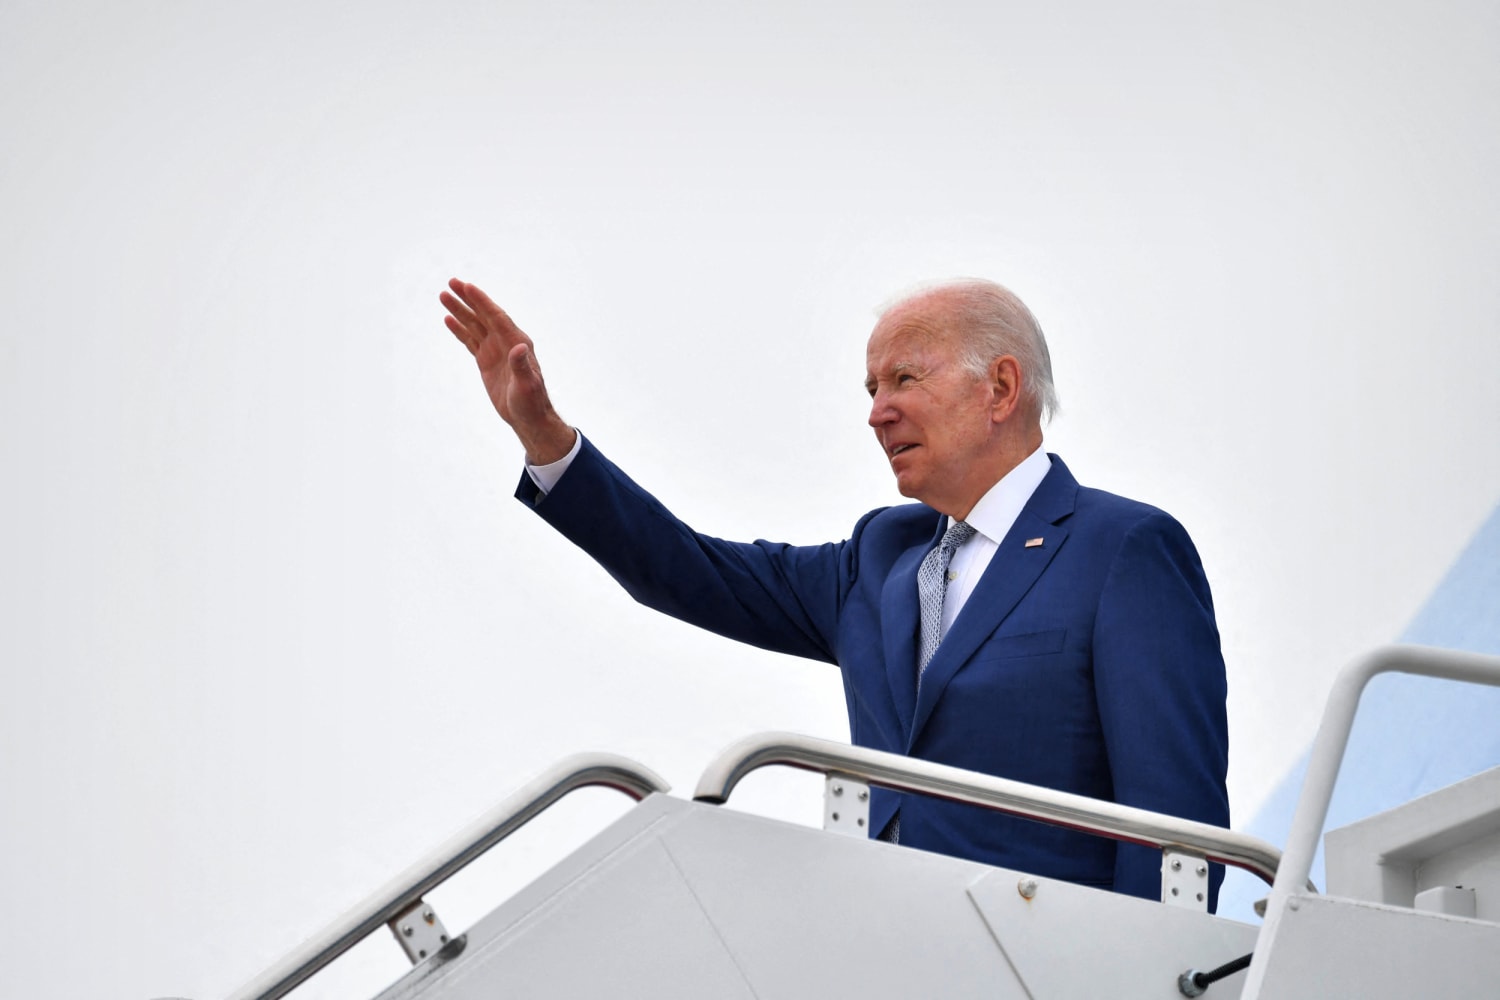 What to watch for during President Biden’s trip to the Middle East